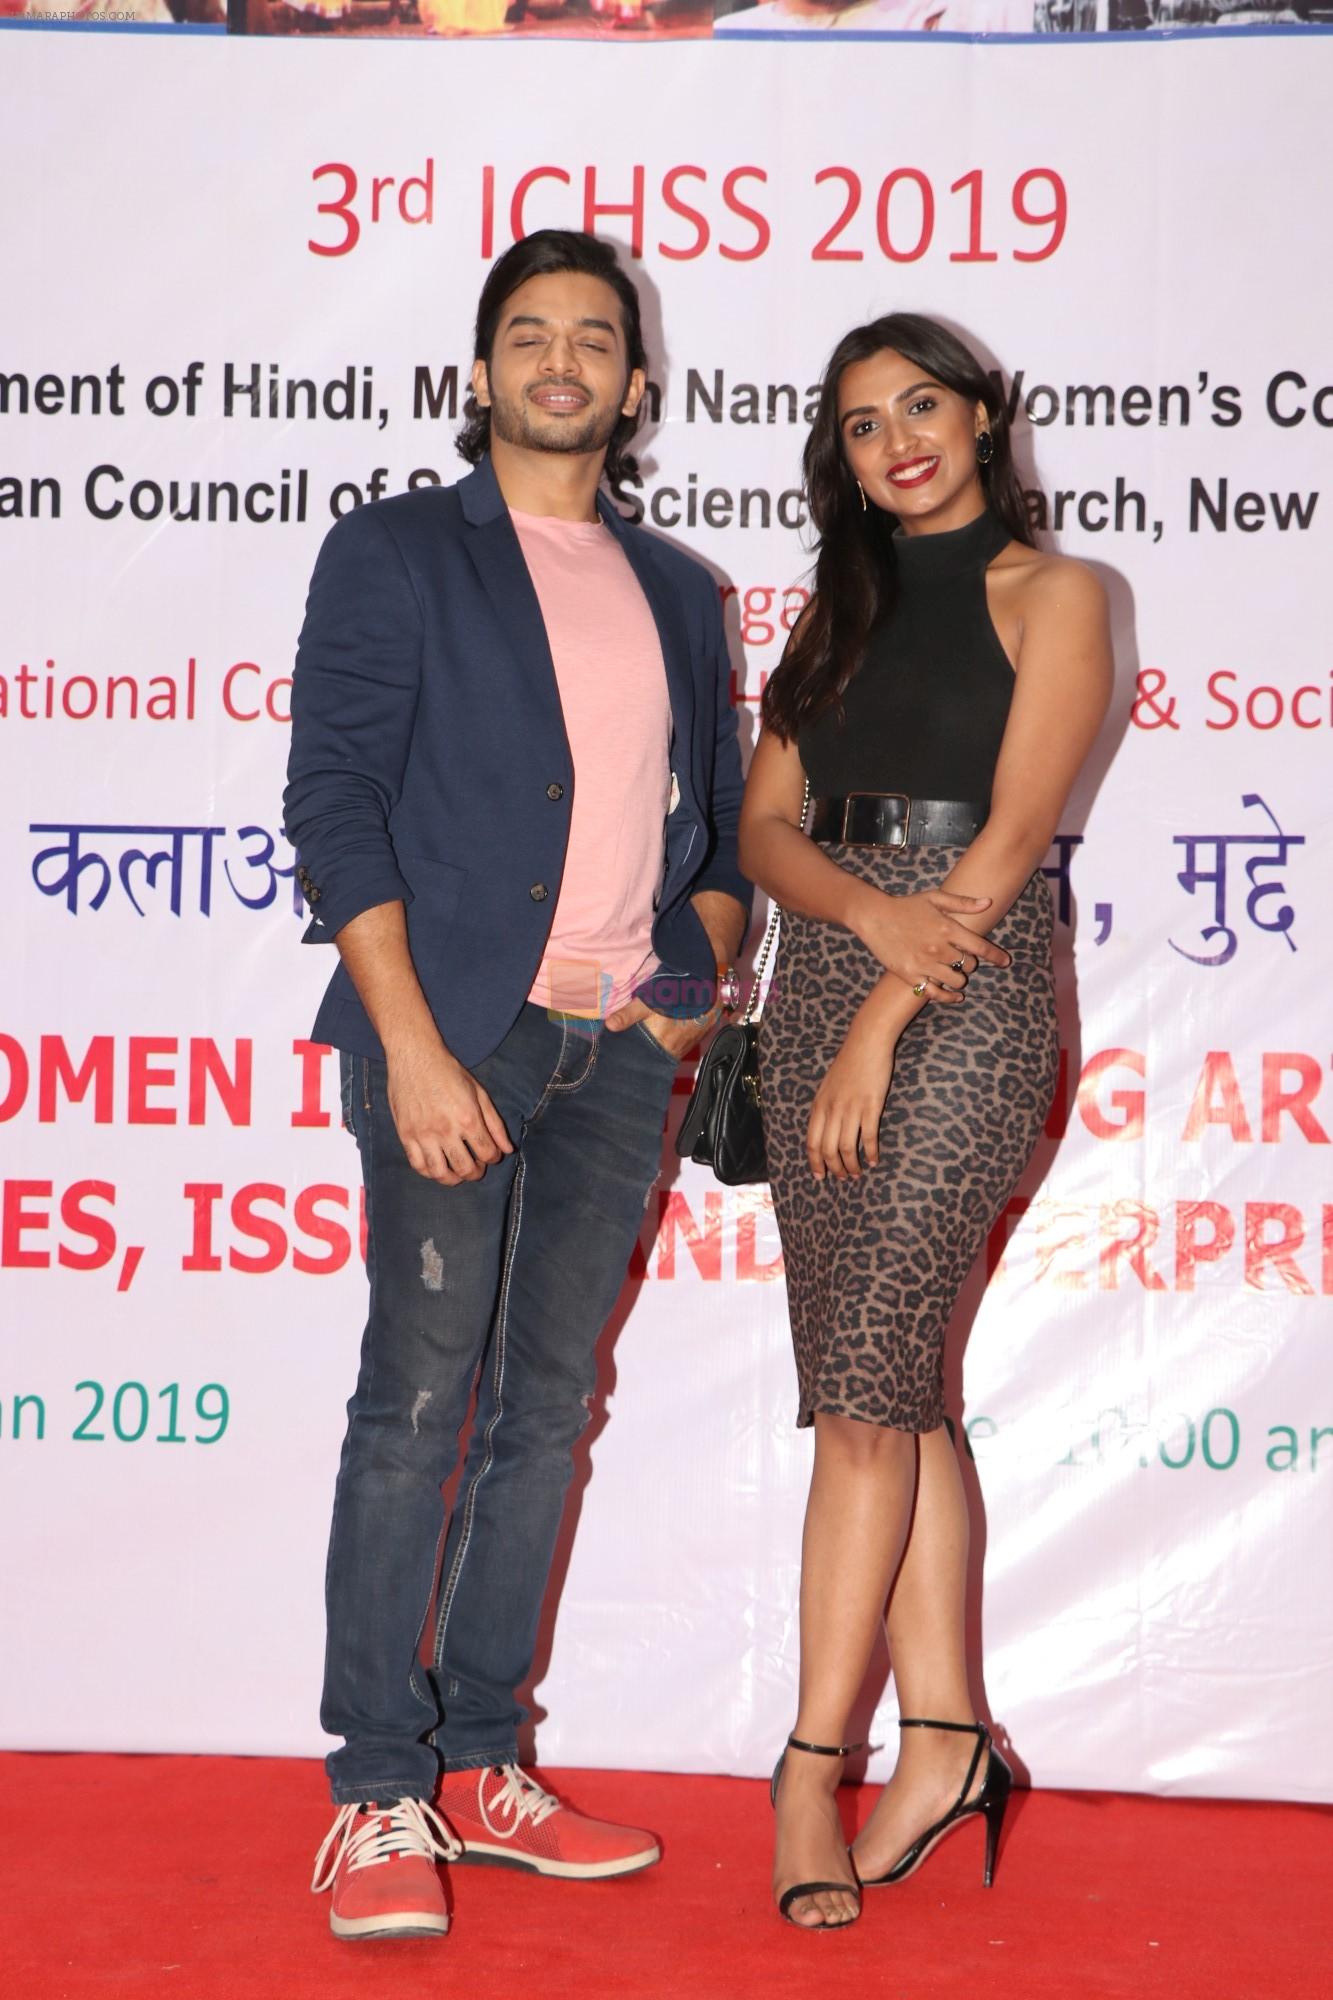 Ansh Gupta, Aditi Bhagat at the 1st Look Music & Poster Launch Of Upcoming Film Is She Raju on 16th Jan 2019